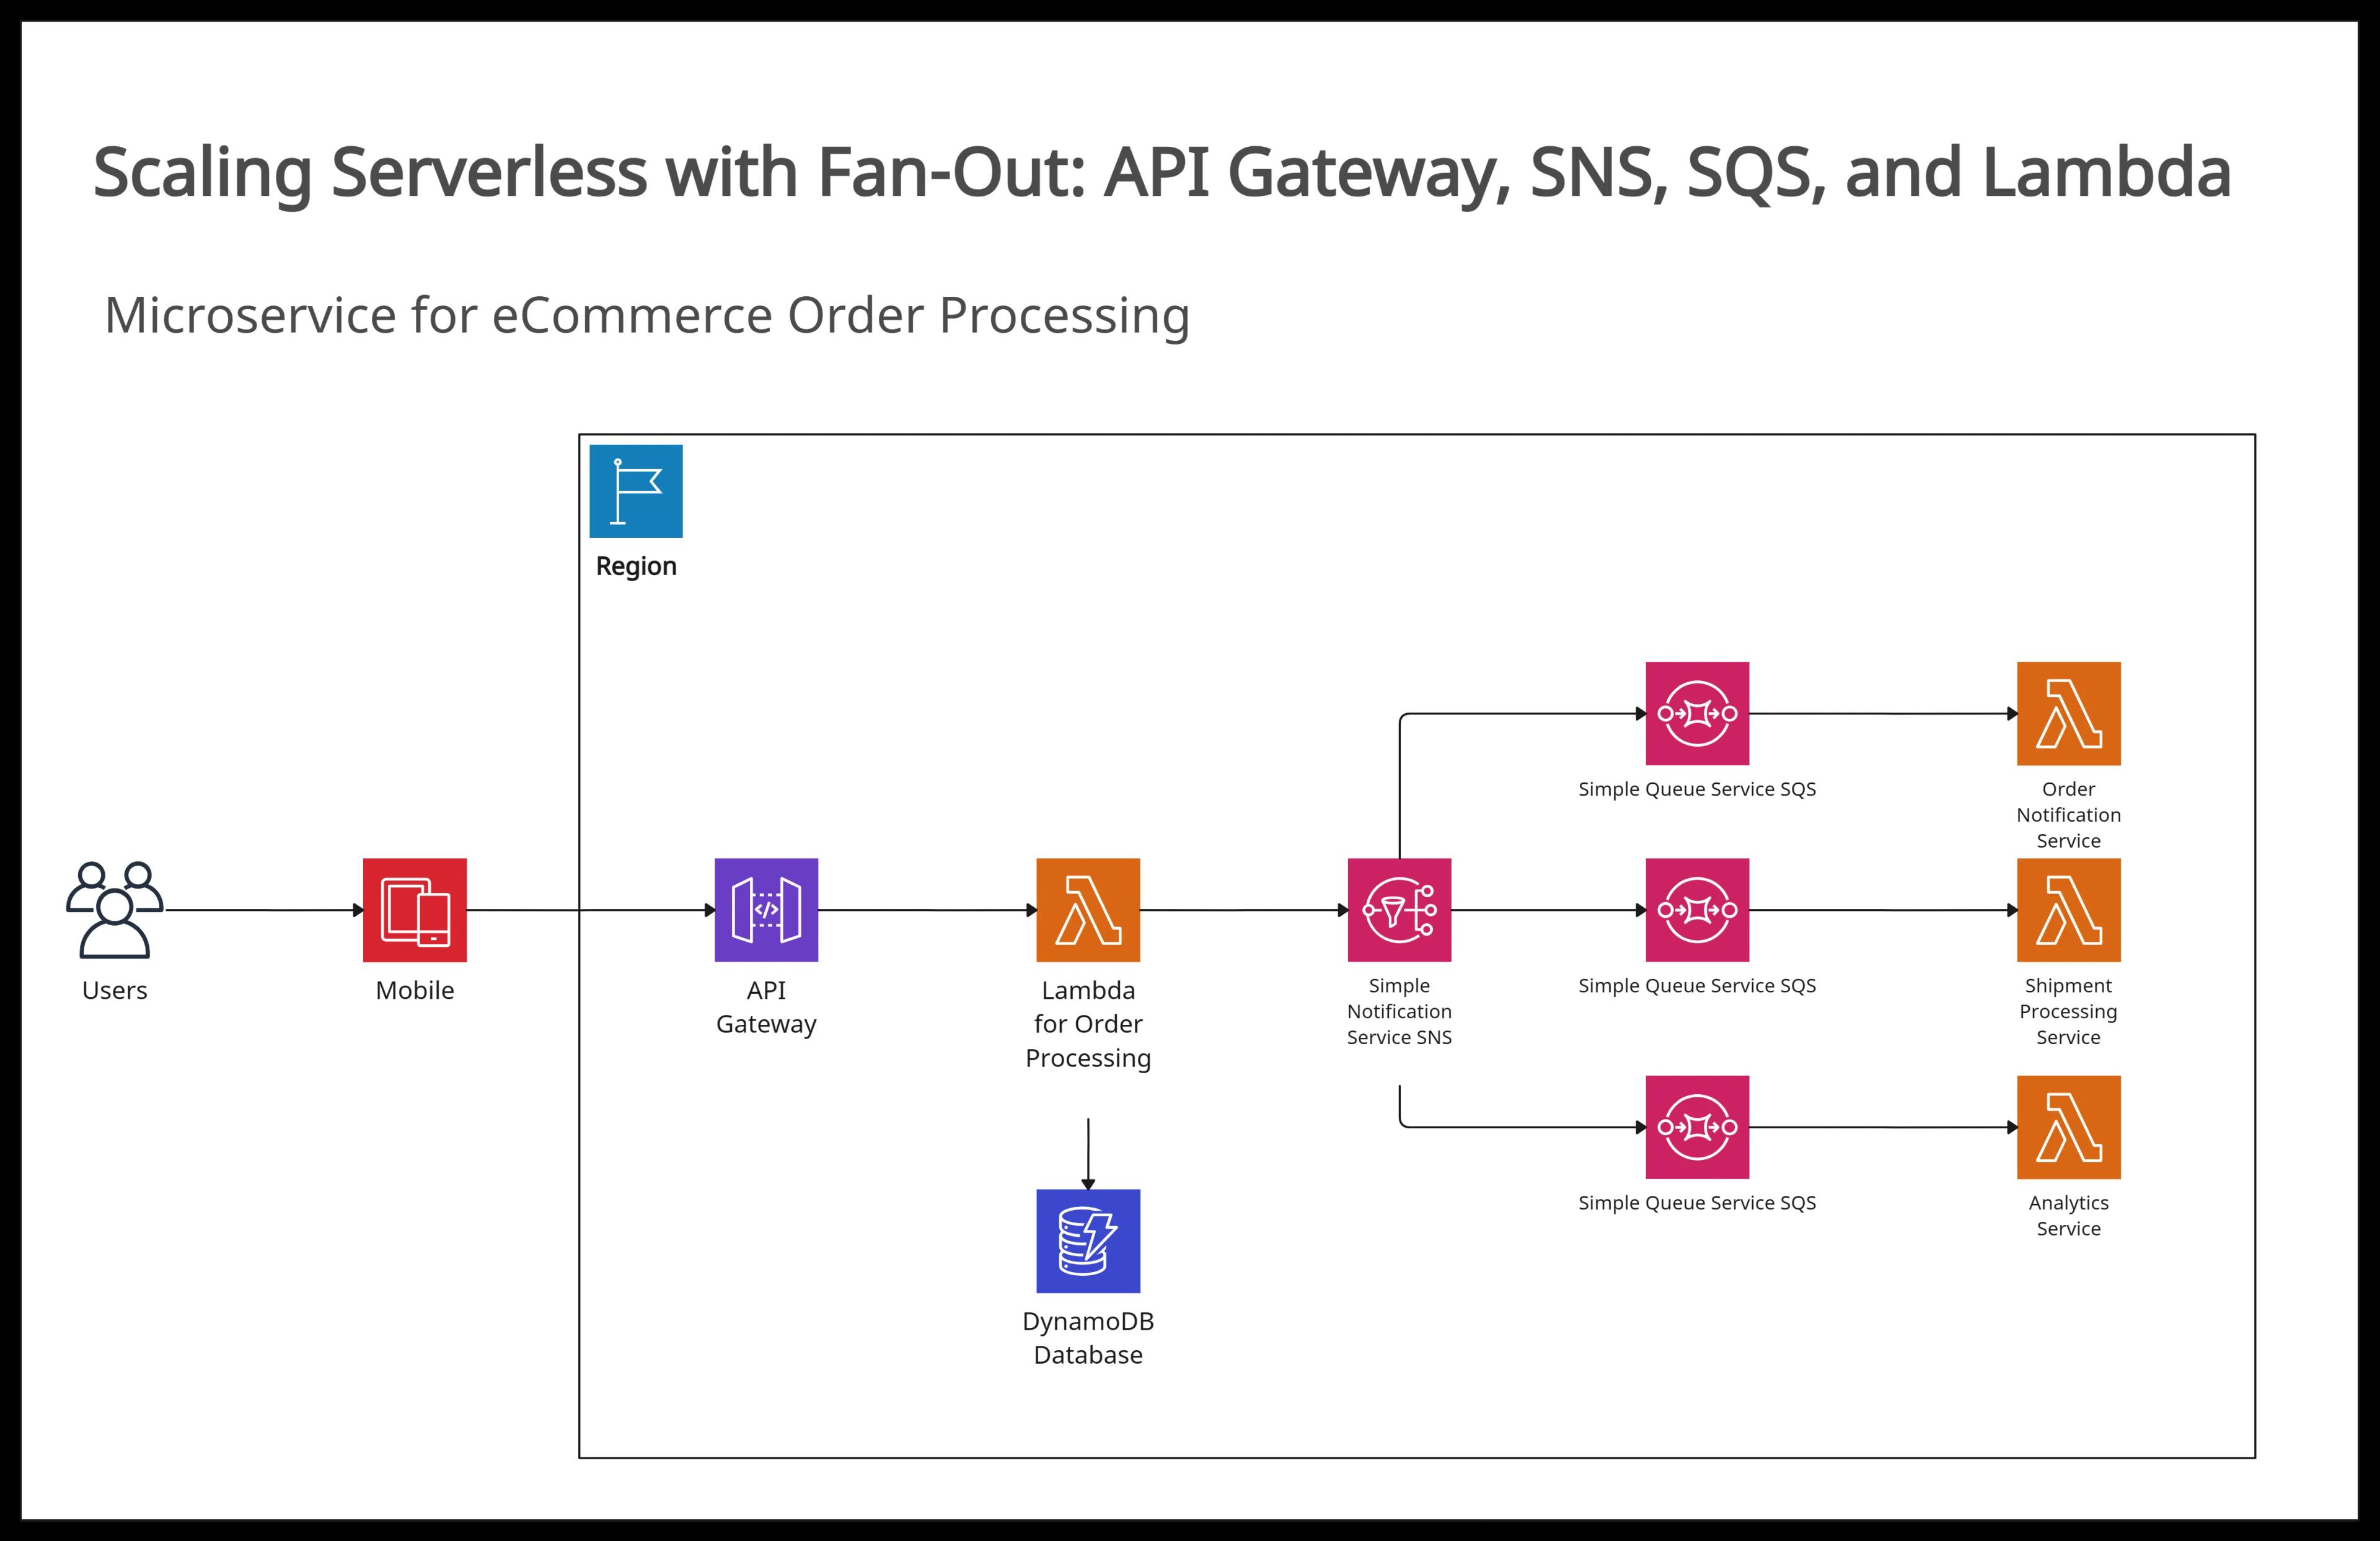 Building Scalable E-commerce Order Processing Microservice with a Serverless Fan-Out Architecture